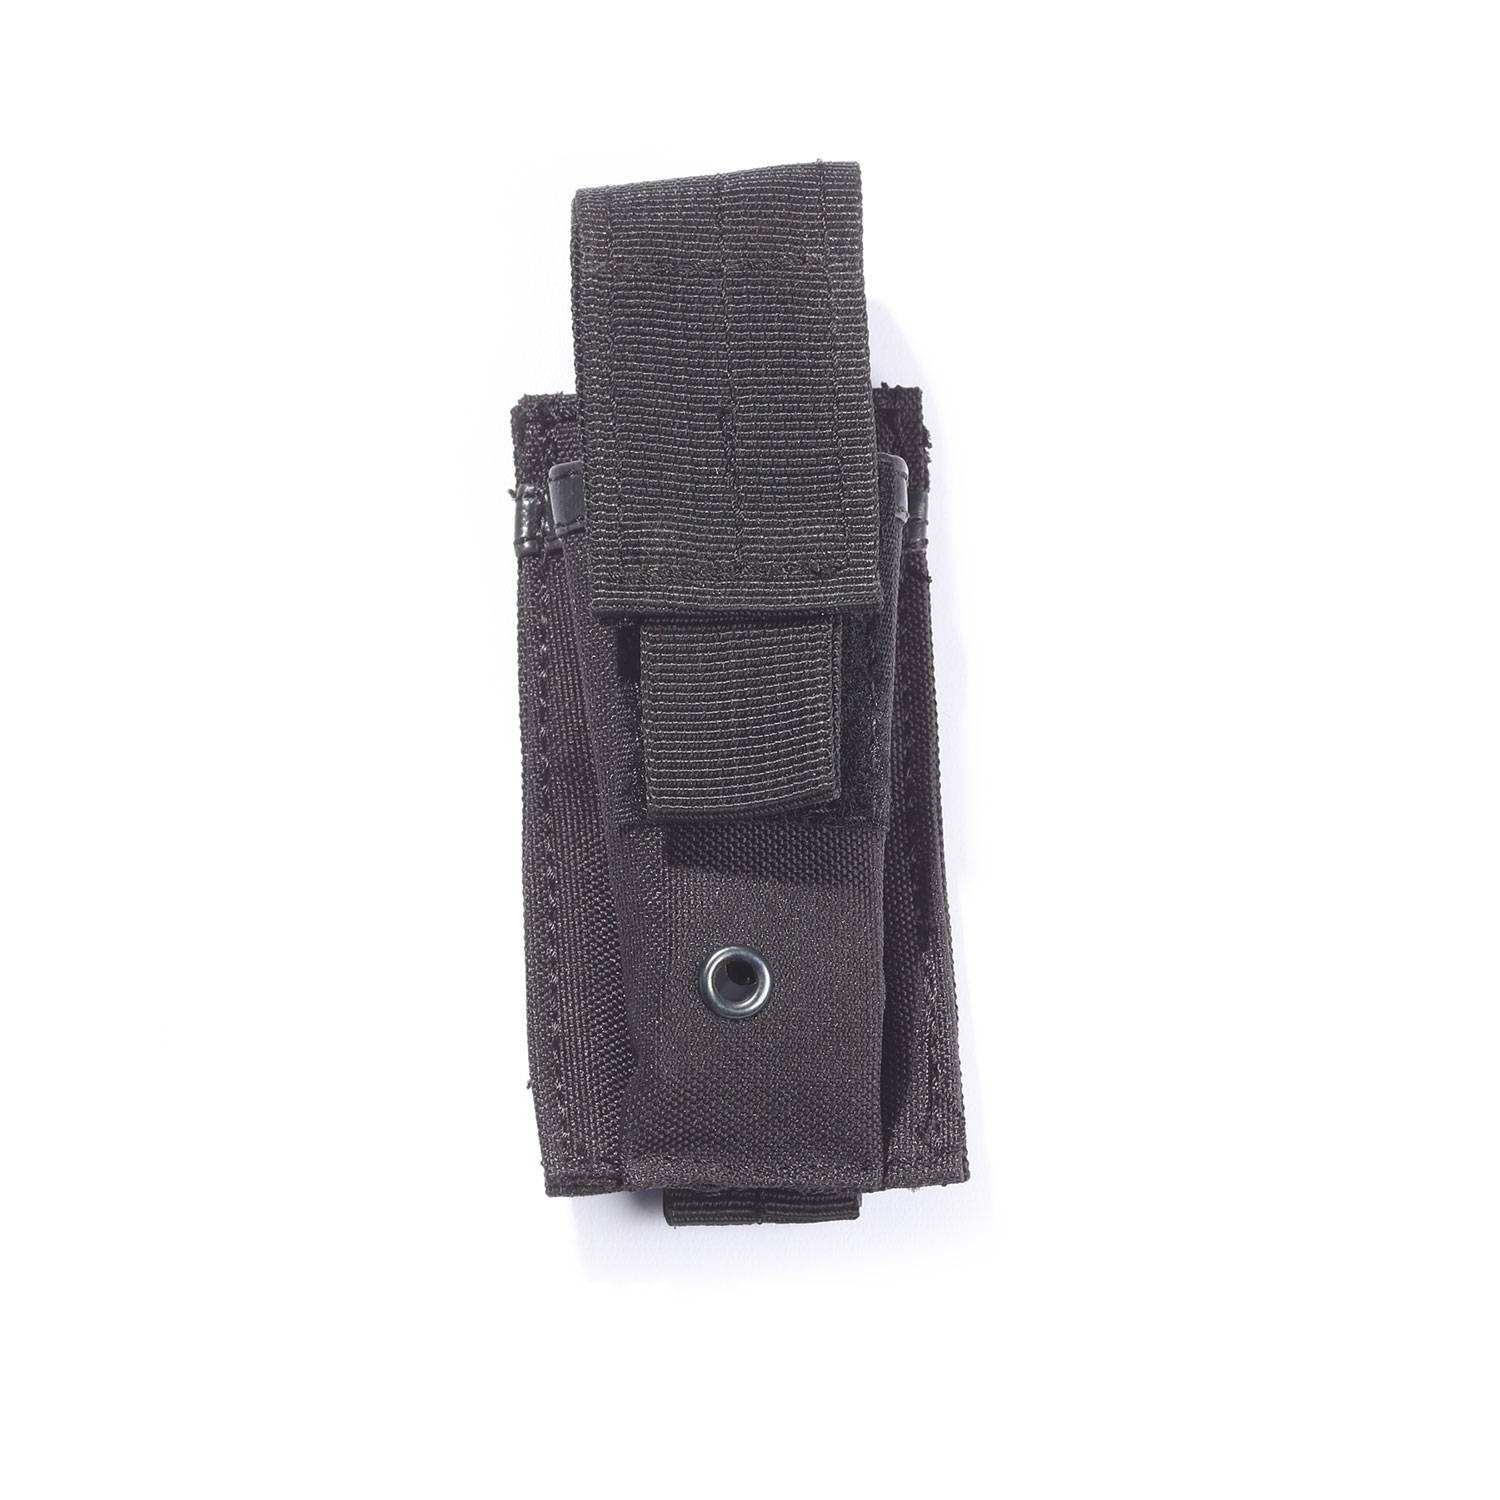 5IVE STAR GEAR SINGLE PISTOL MAG POUCH